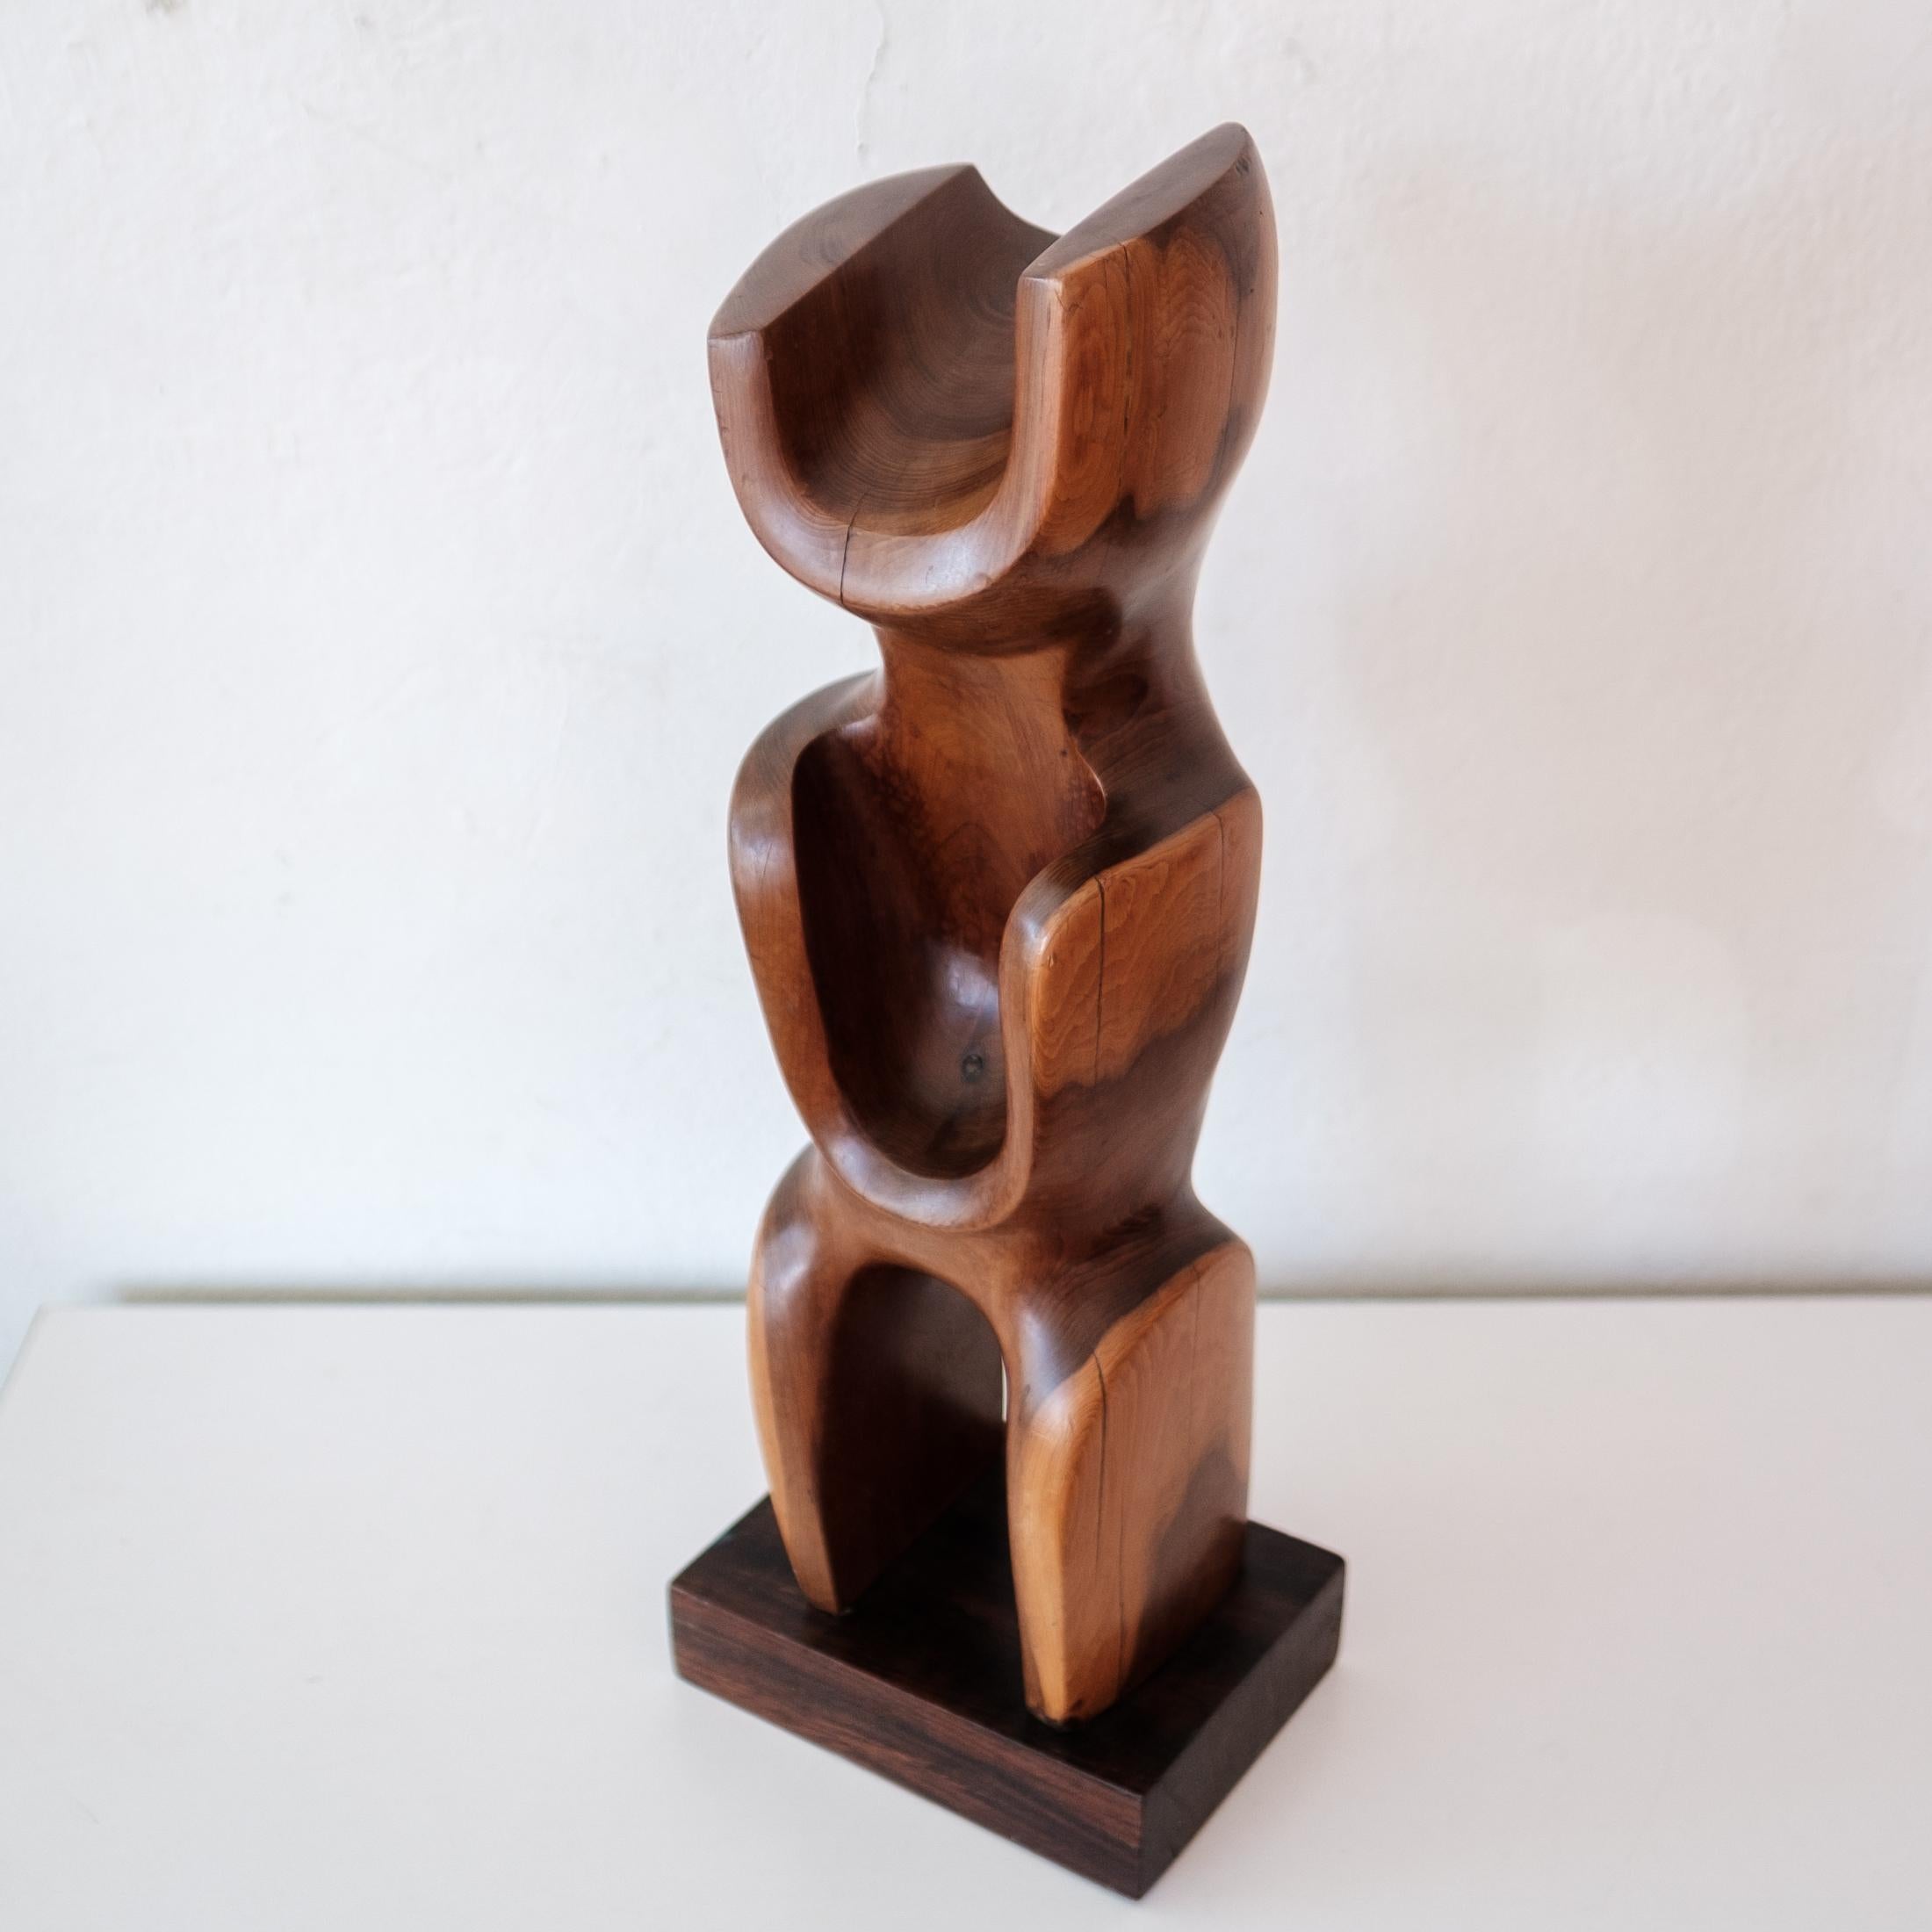 Hand-Carved Modernist Abstract Wood Sculpture 1960s